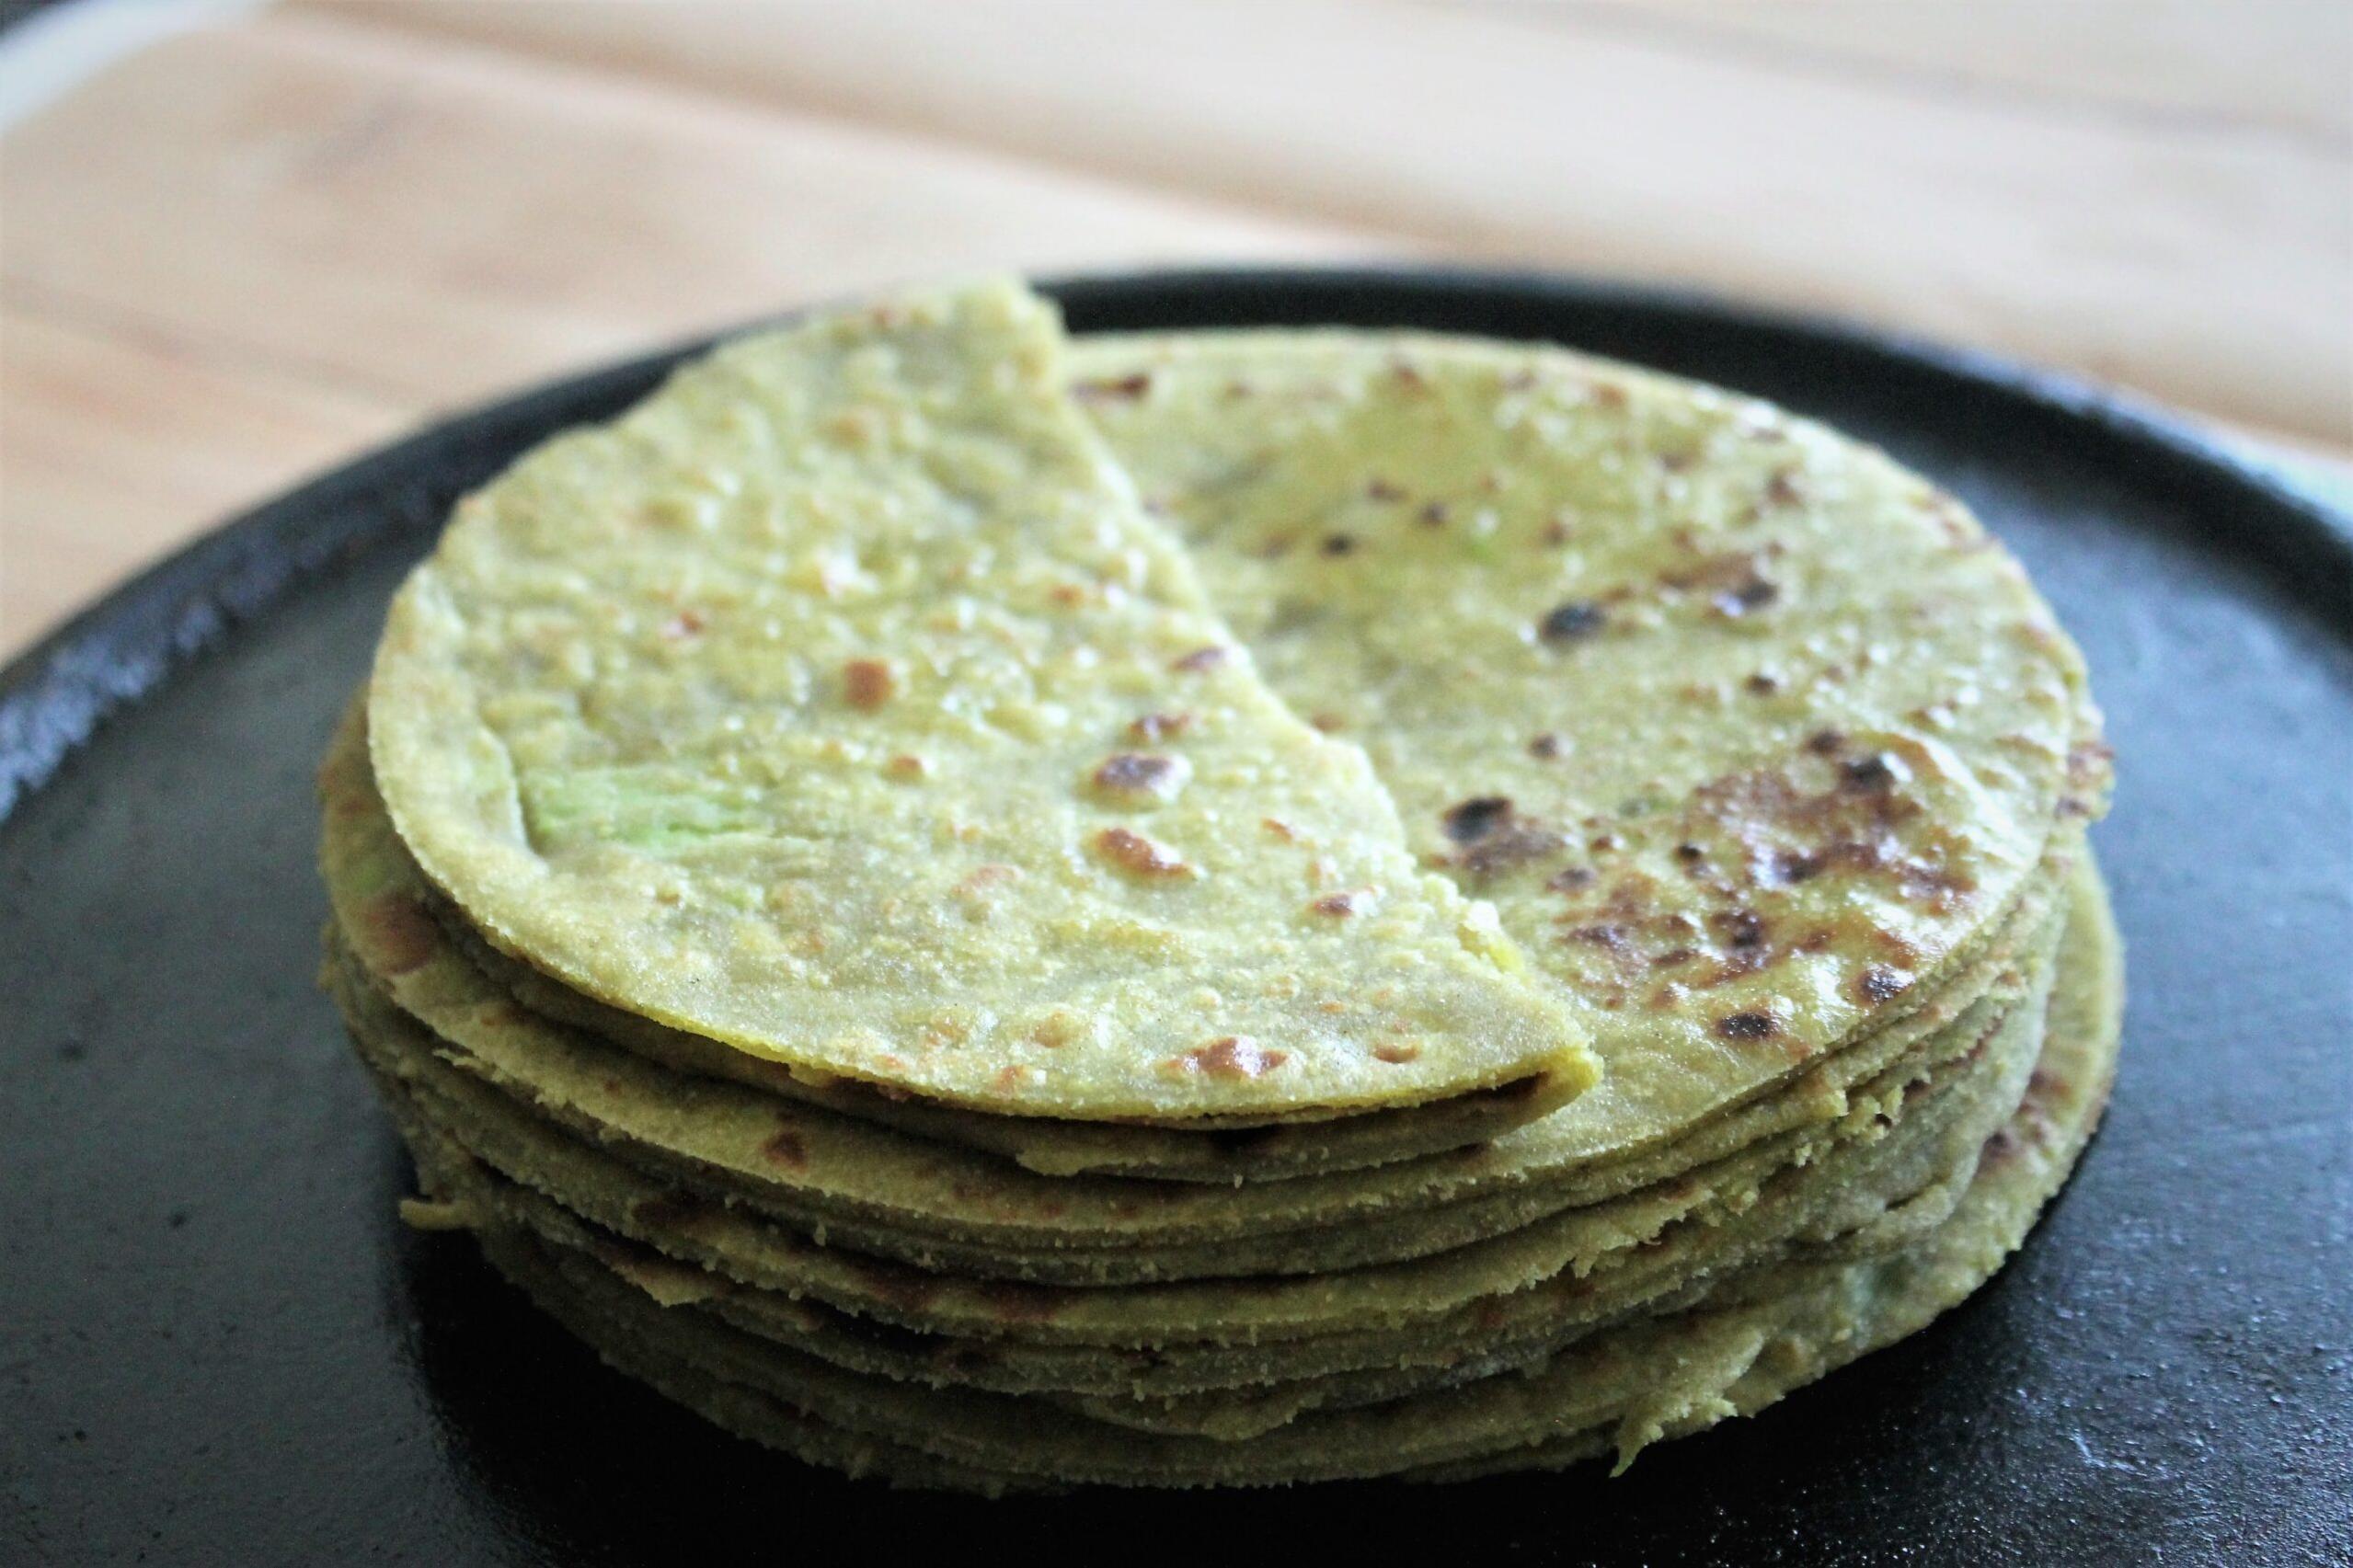  Upgrade your taco game with these amaranth tortillas